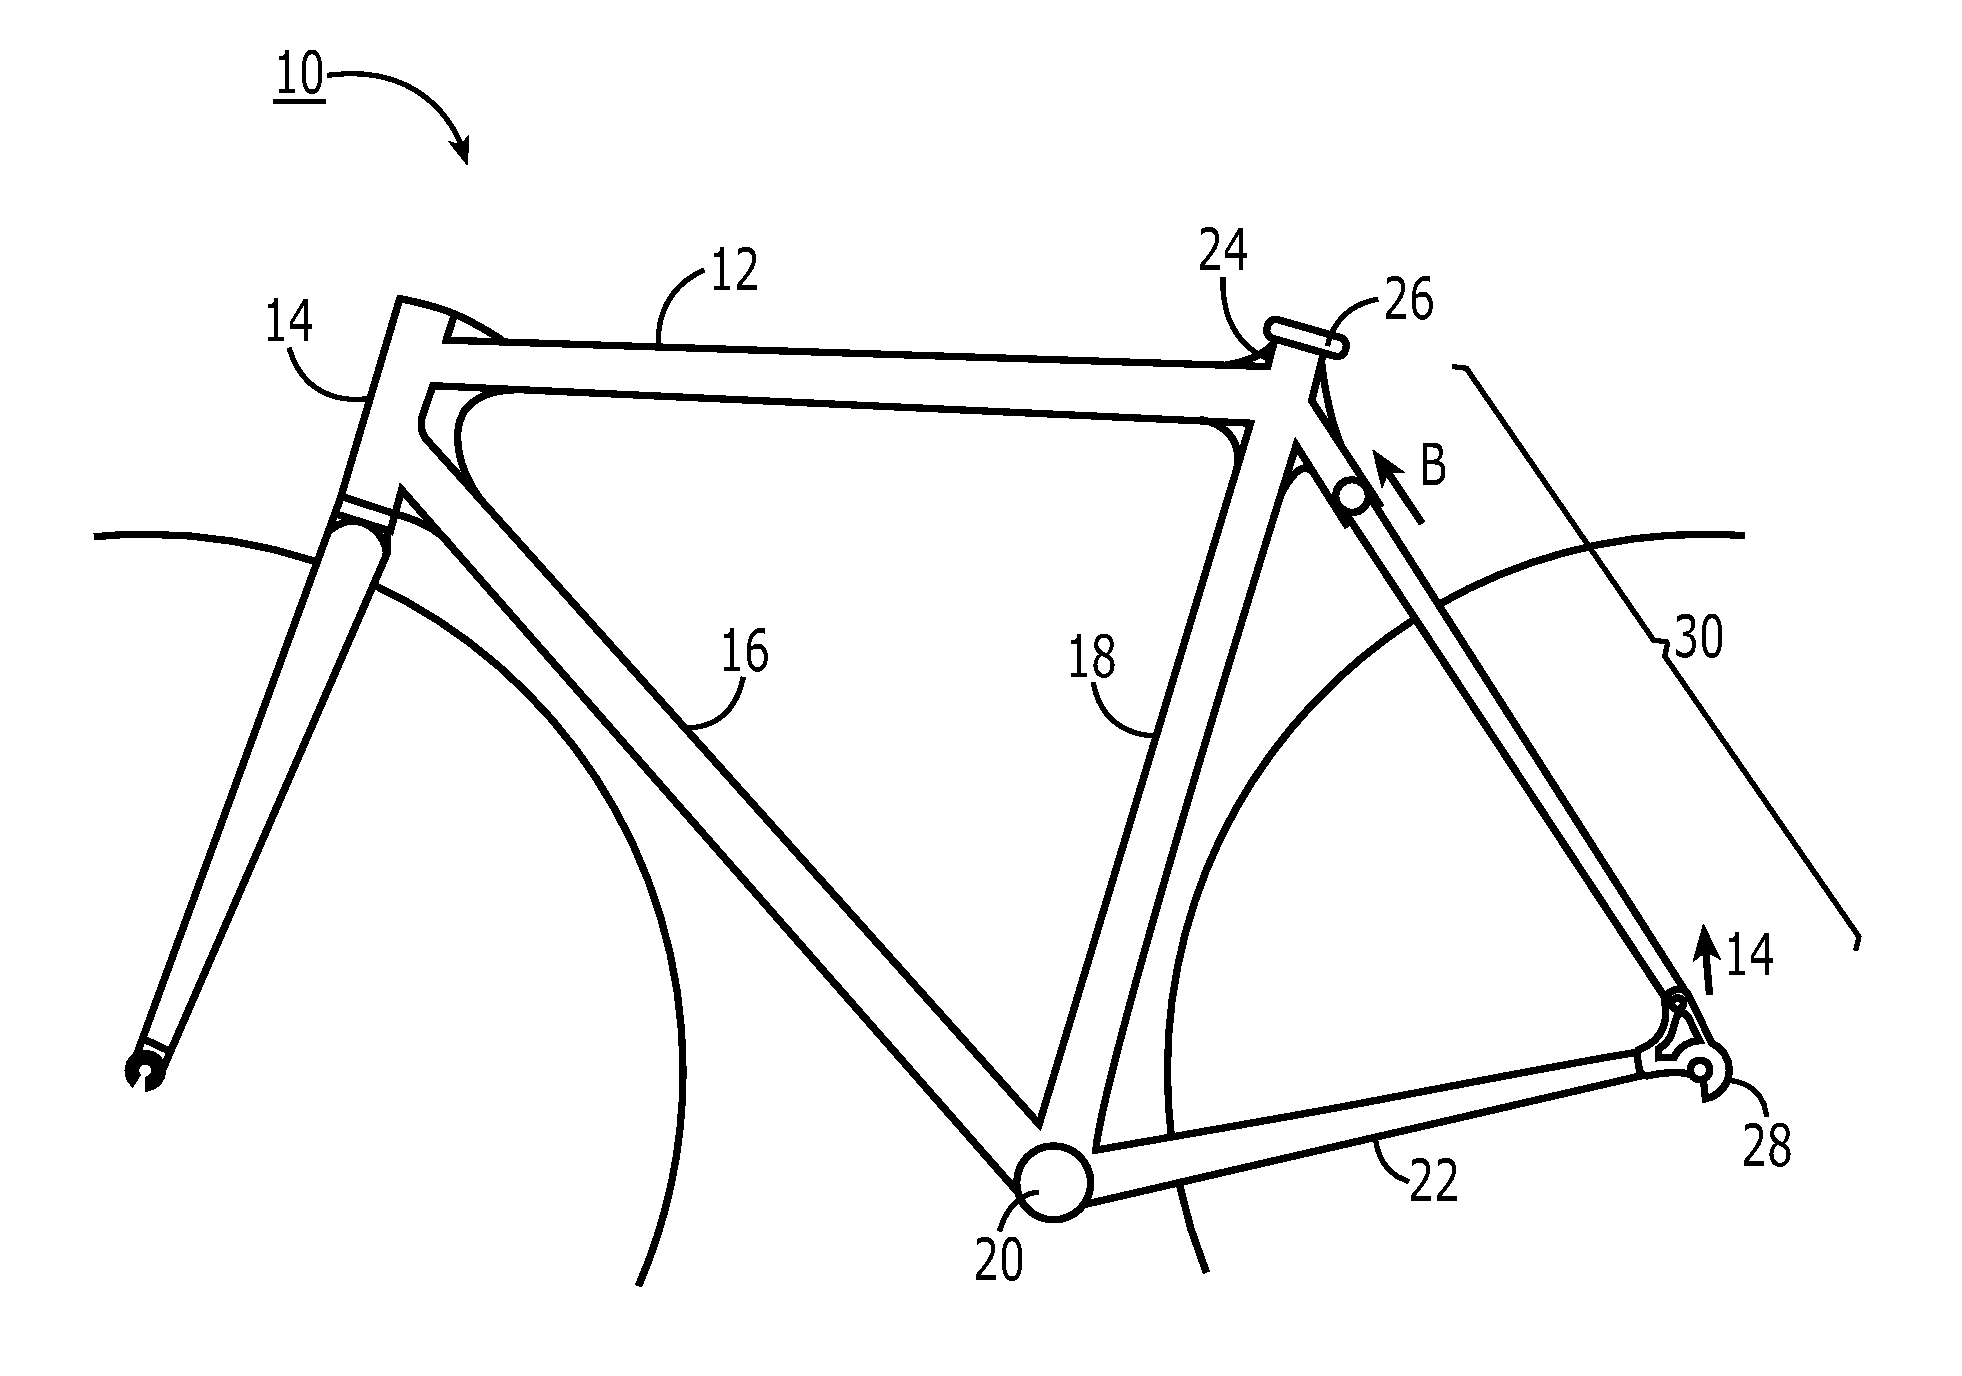 Simplified rear suspension for a bicycle or the like